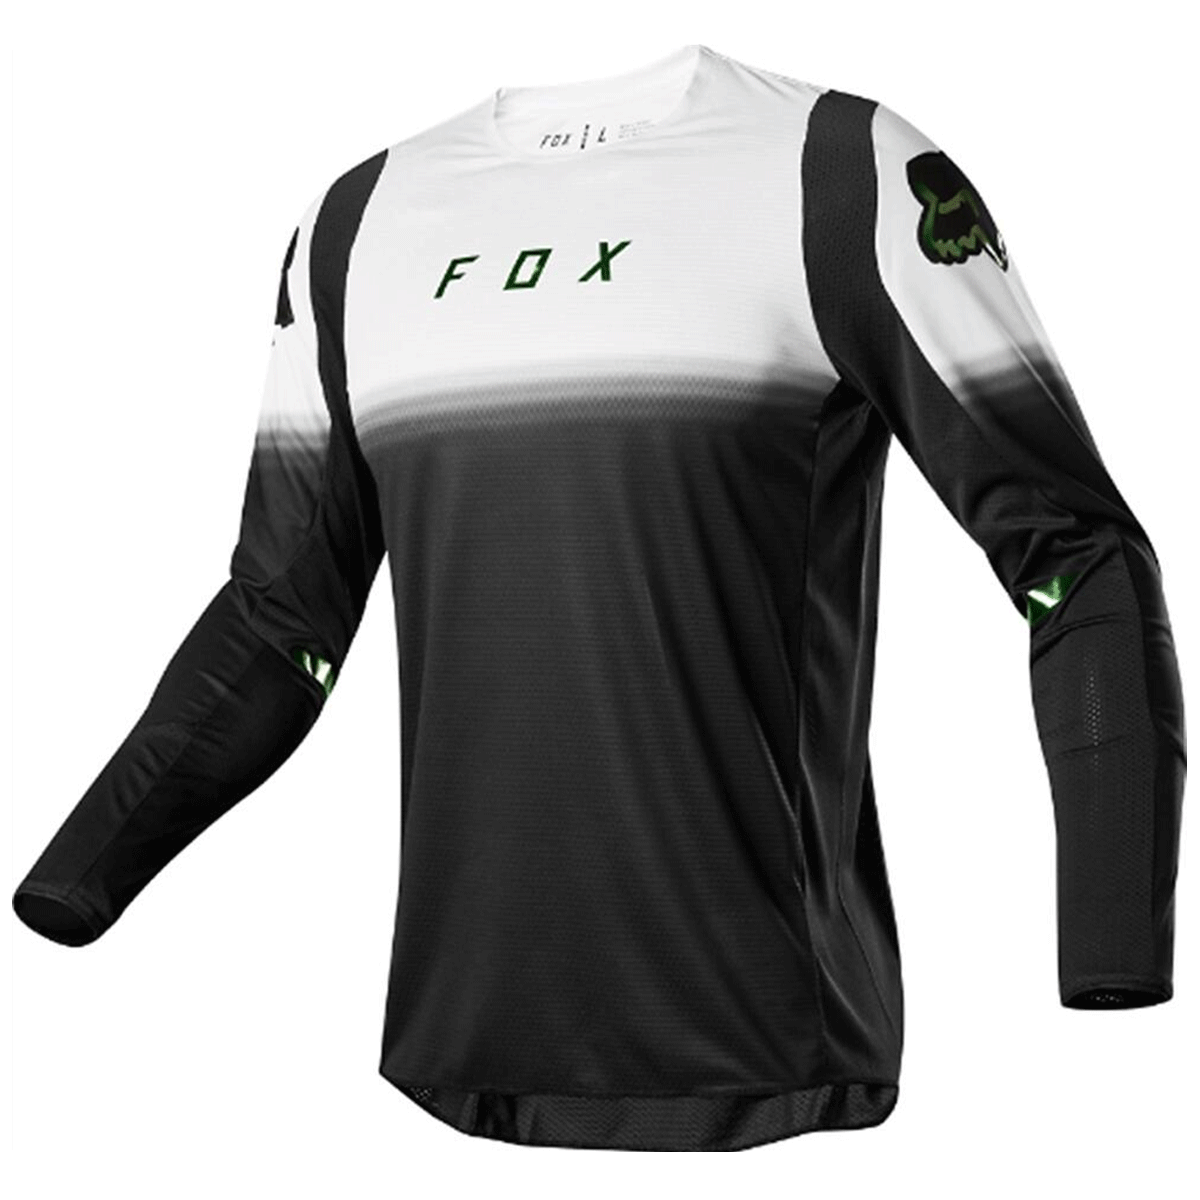 fox black and white jersey